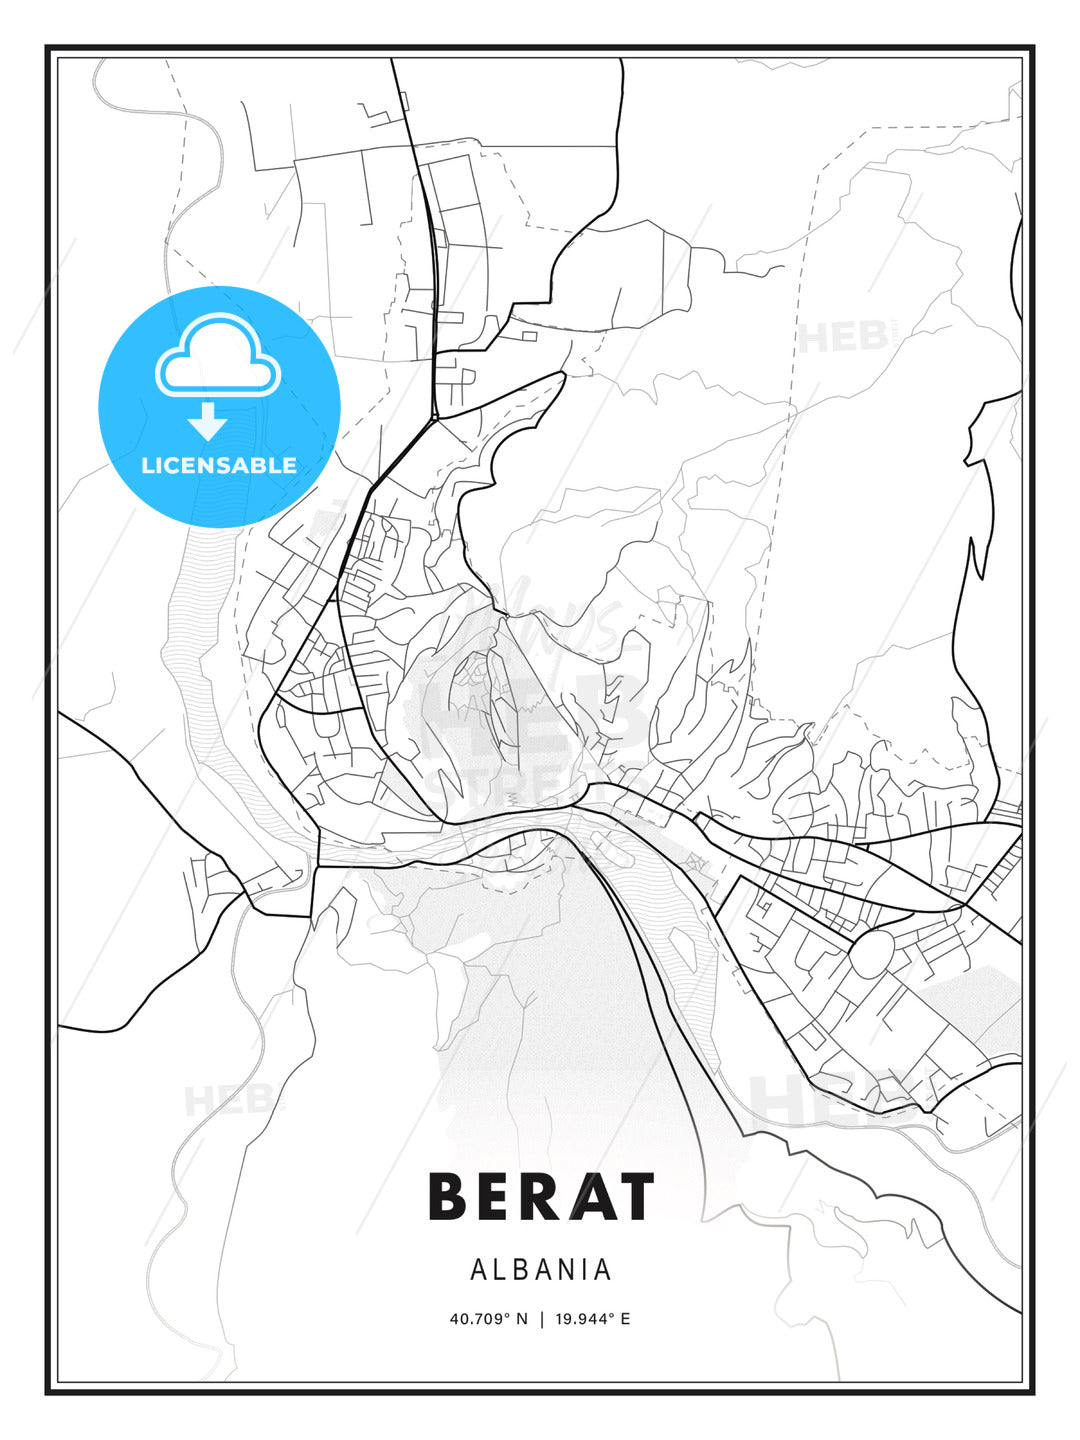 Berat, Albania, Modern Print Template in Various Formats - HEBSTREITS Sketches